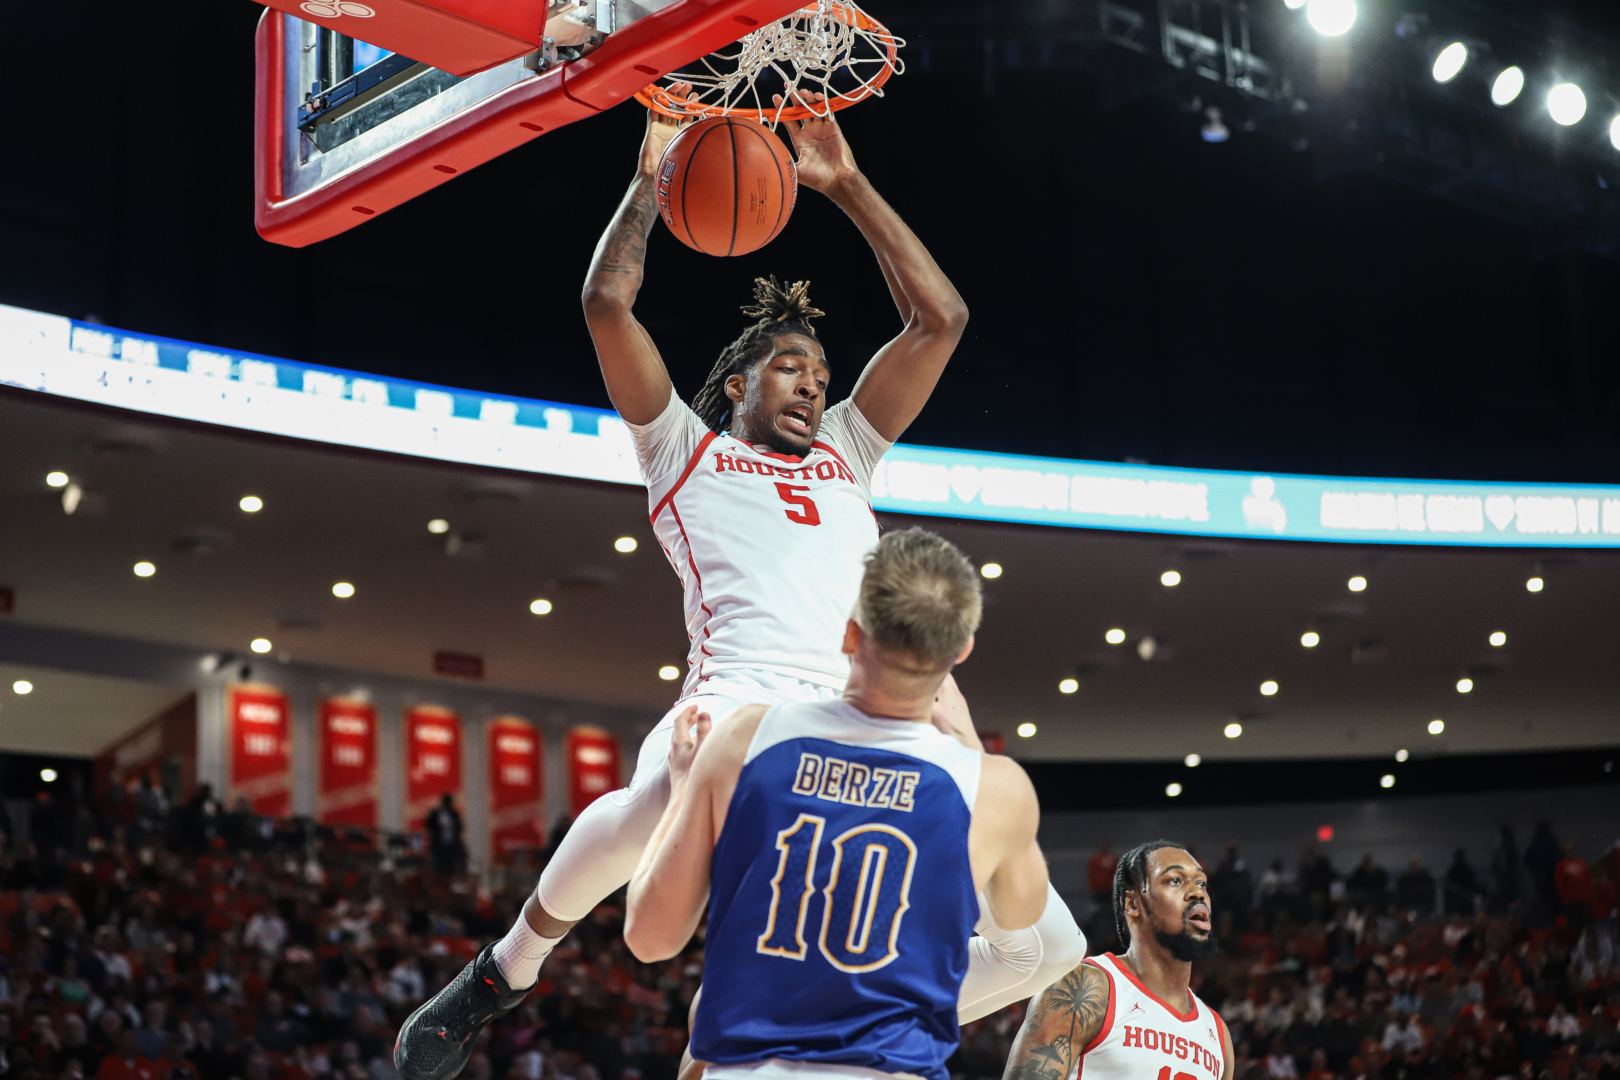 UH forward Ja'Vier Francis recorded his third double-double of the season with 23 points and 13 rebounds in the Cougars' win over McNeese State. | Anh Le/The Cougar